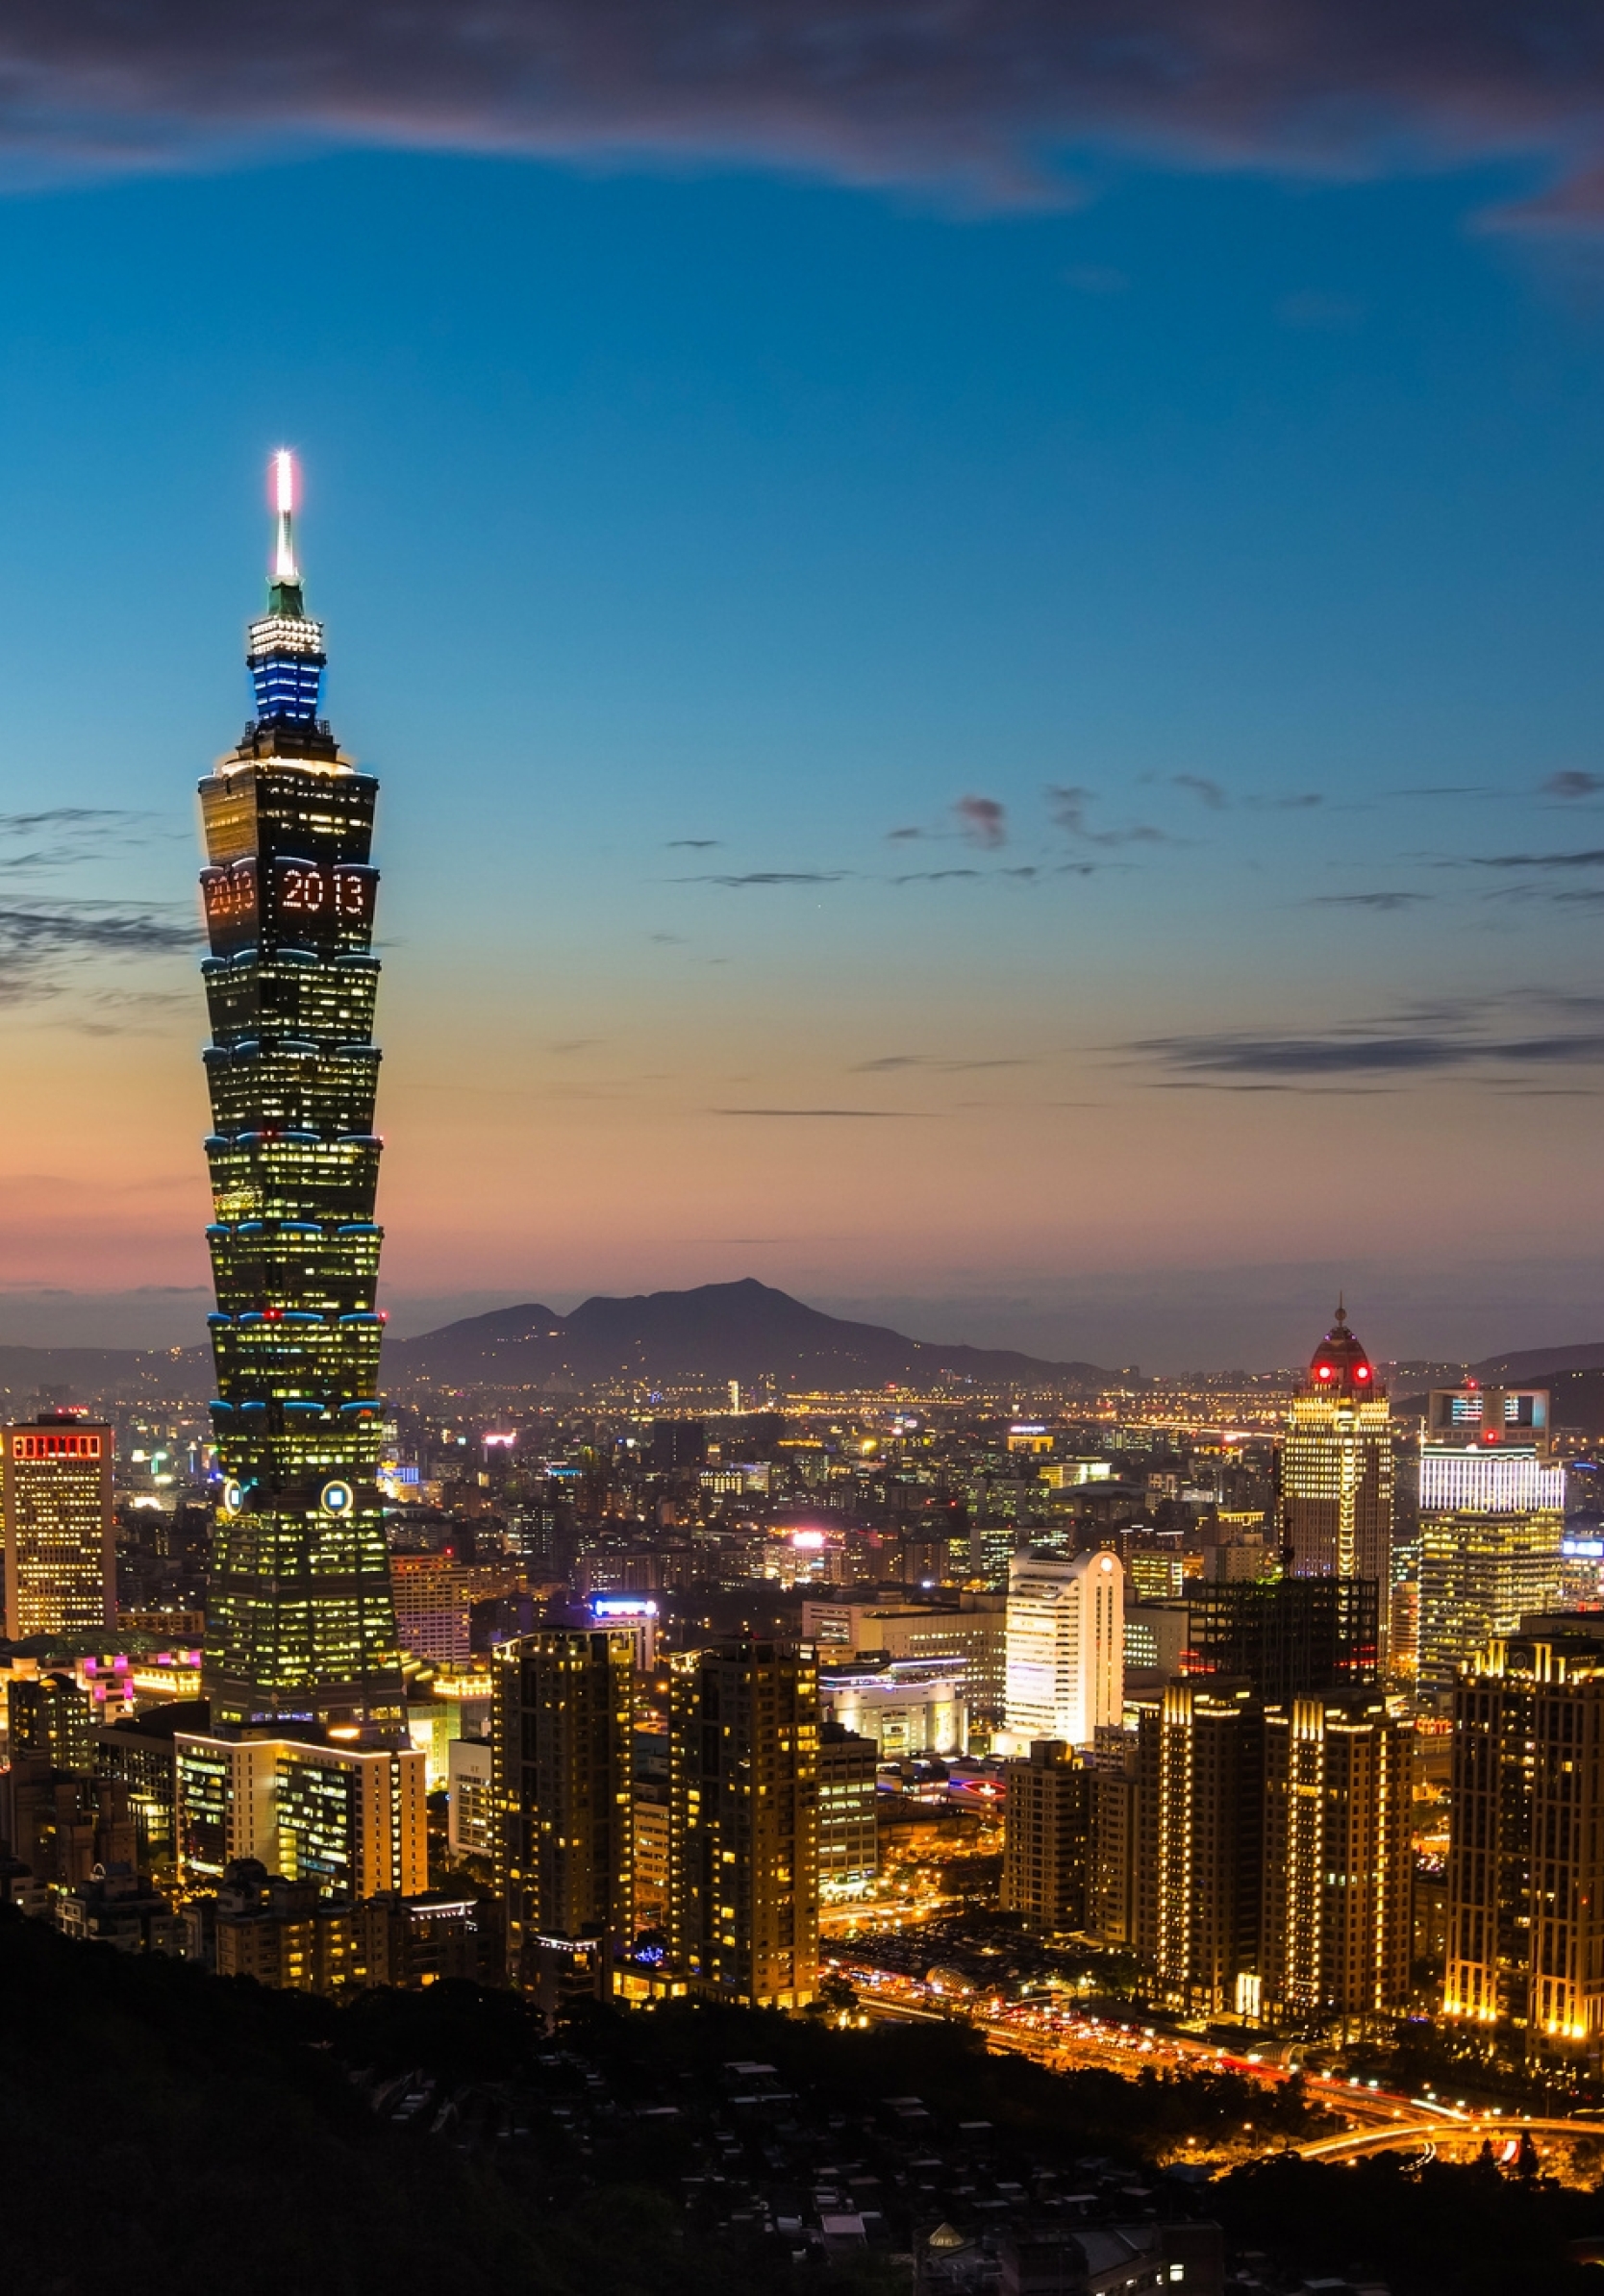 1668x23 Taiwan Taipei Republic Of China 1668x23 Resolution Wallpaper Hd City 4k Wallpapers Images Photos And Background Wallpapers Den